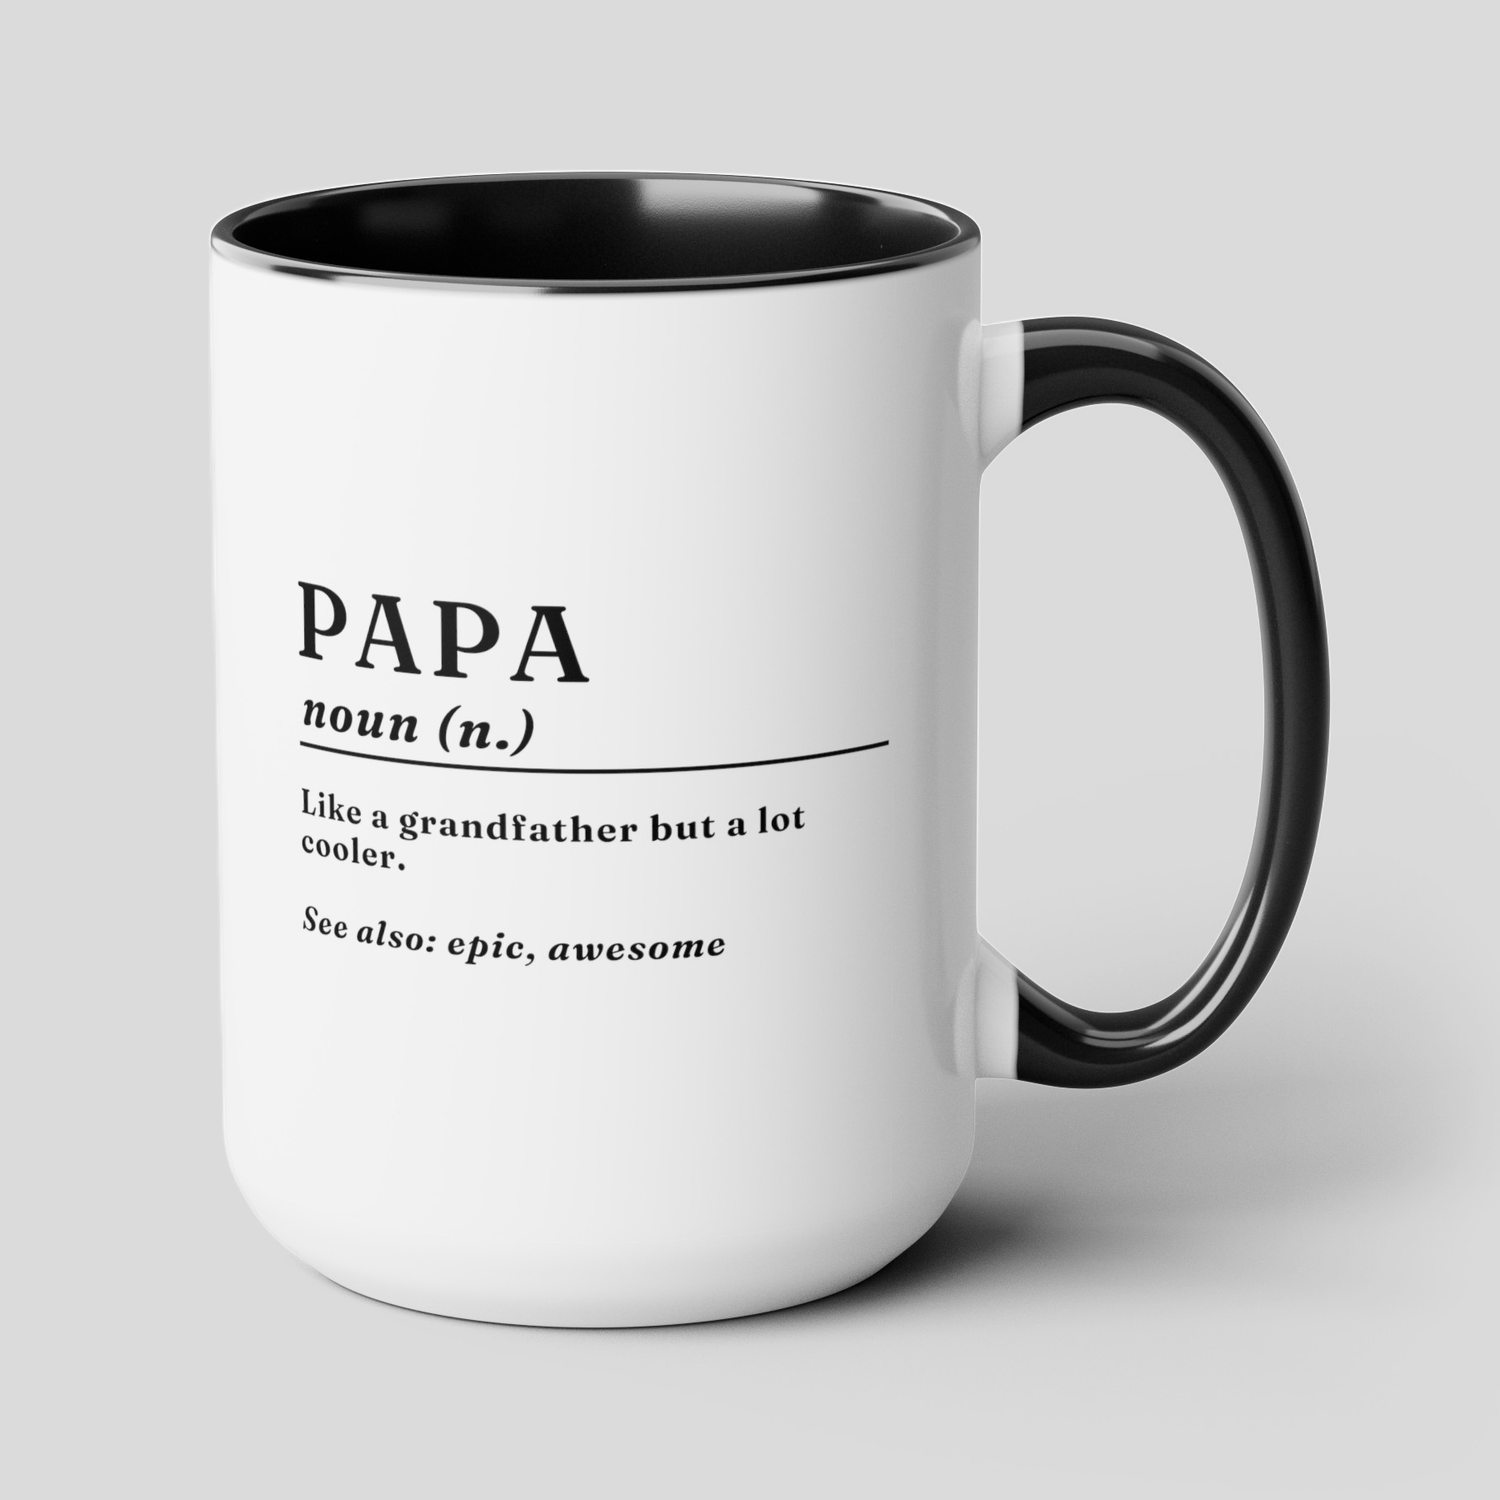 Papa Definition 15oz white with black accent funny large coffee mug gift for dad new grandpa grandfather father's day best granddad ever waveywares wavey wares wavywares wavy wares cover